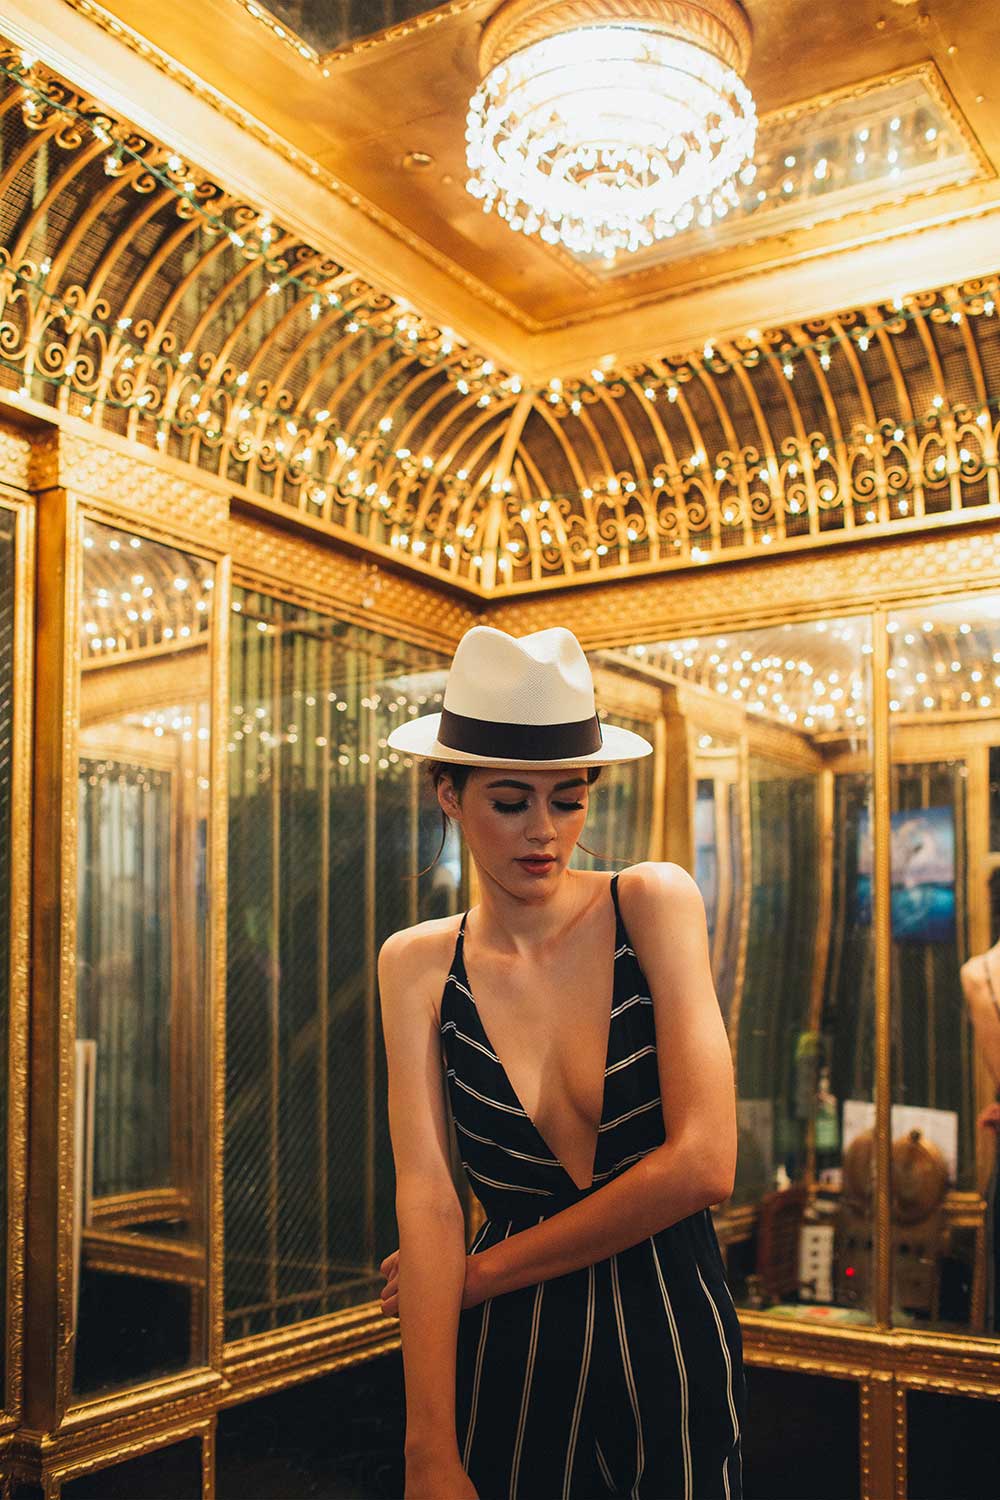 Woman in black striped dress and white hat standing in gold mirrored elevator